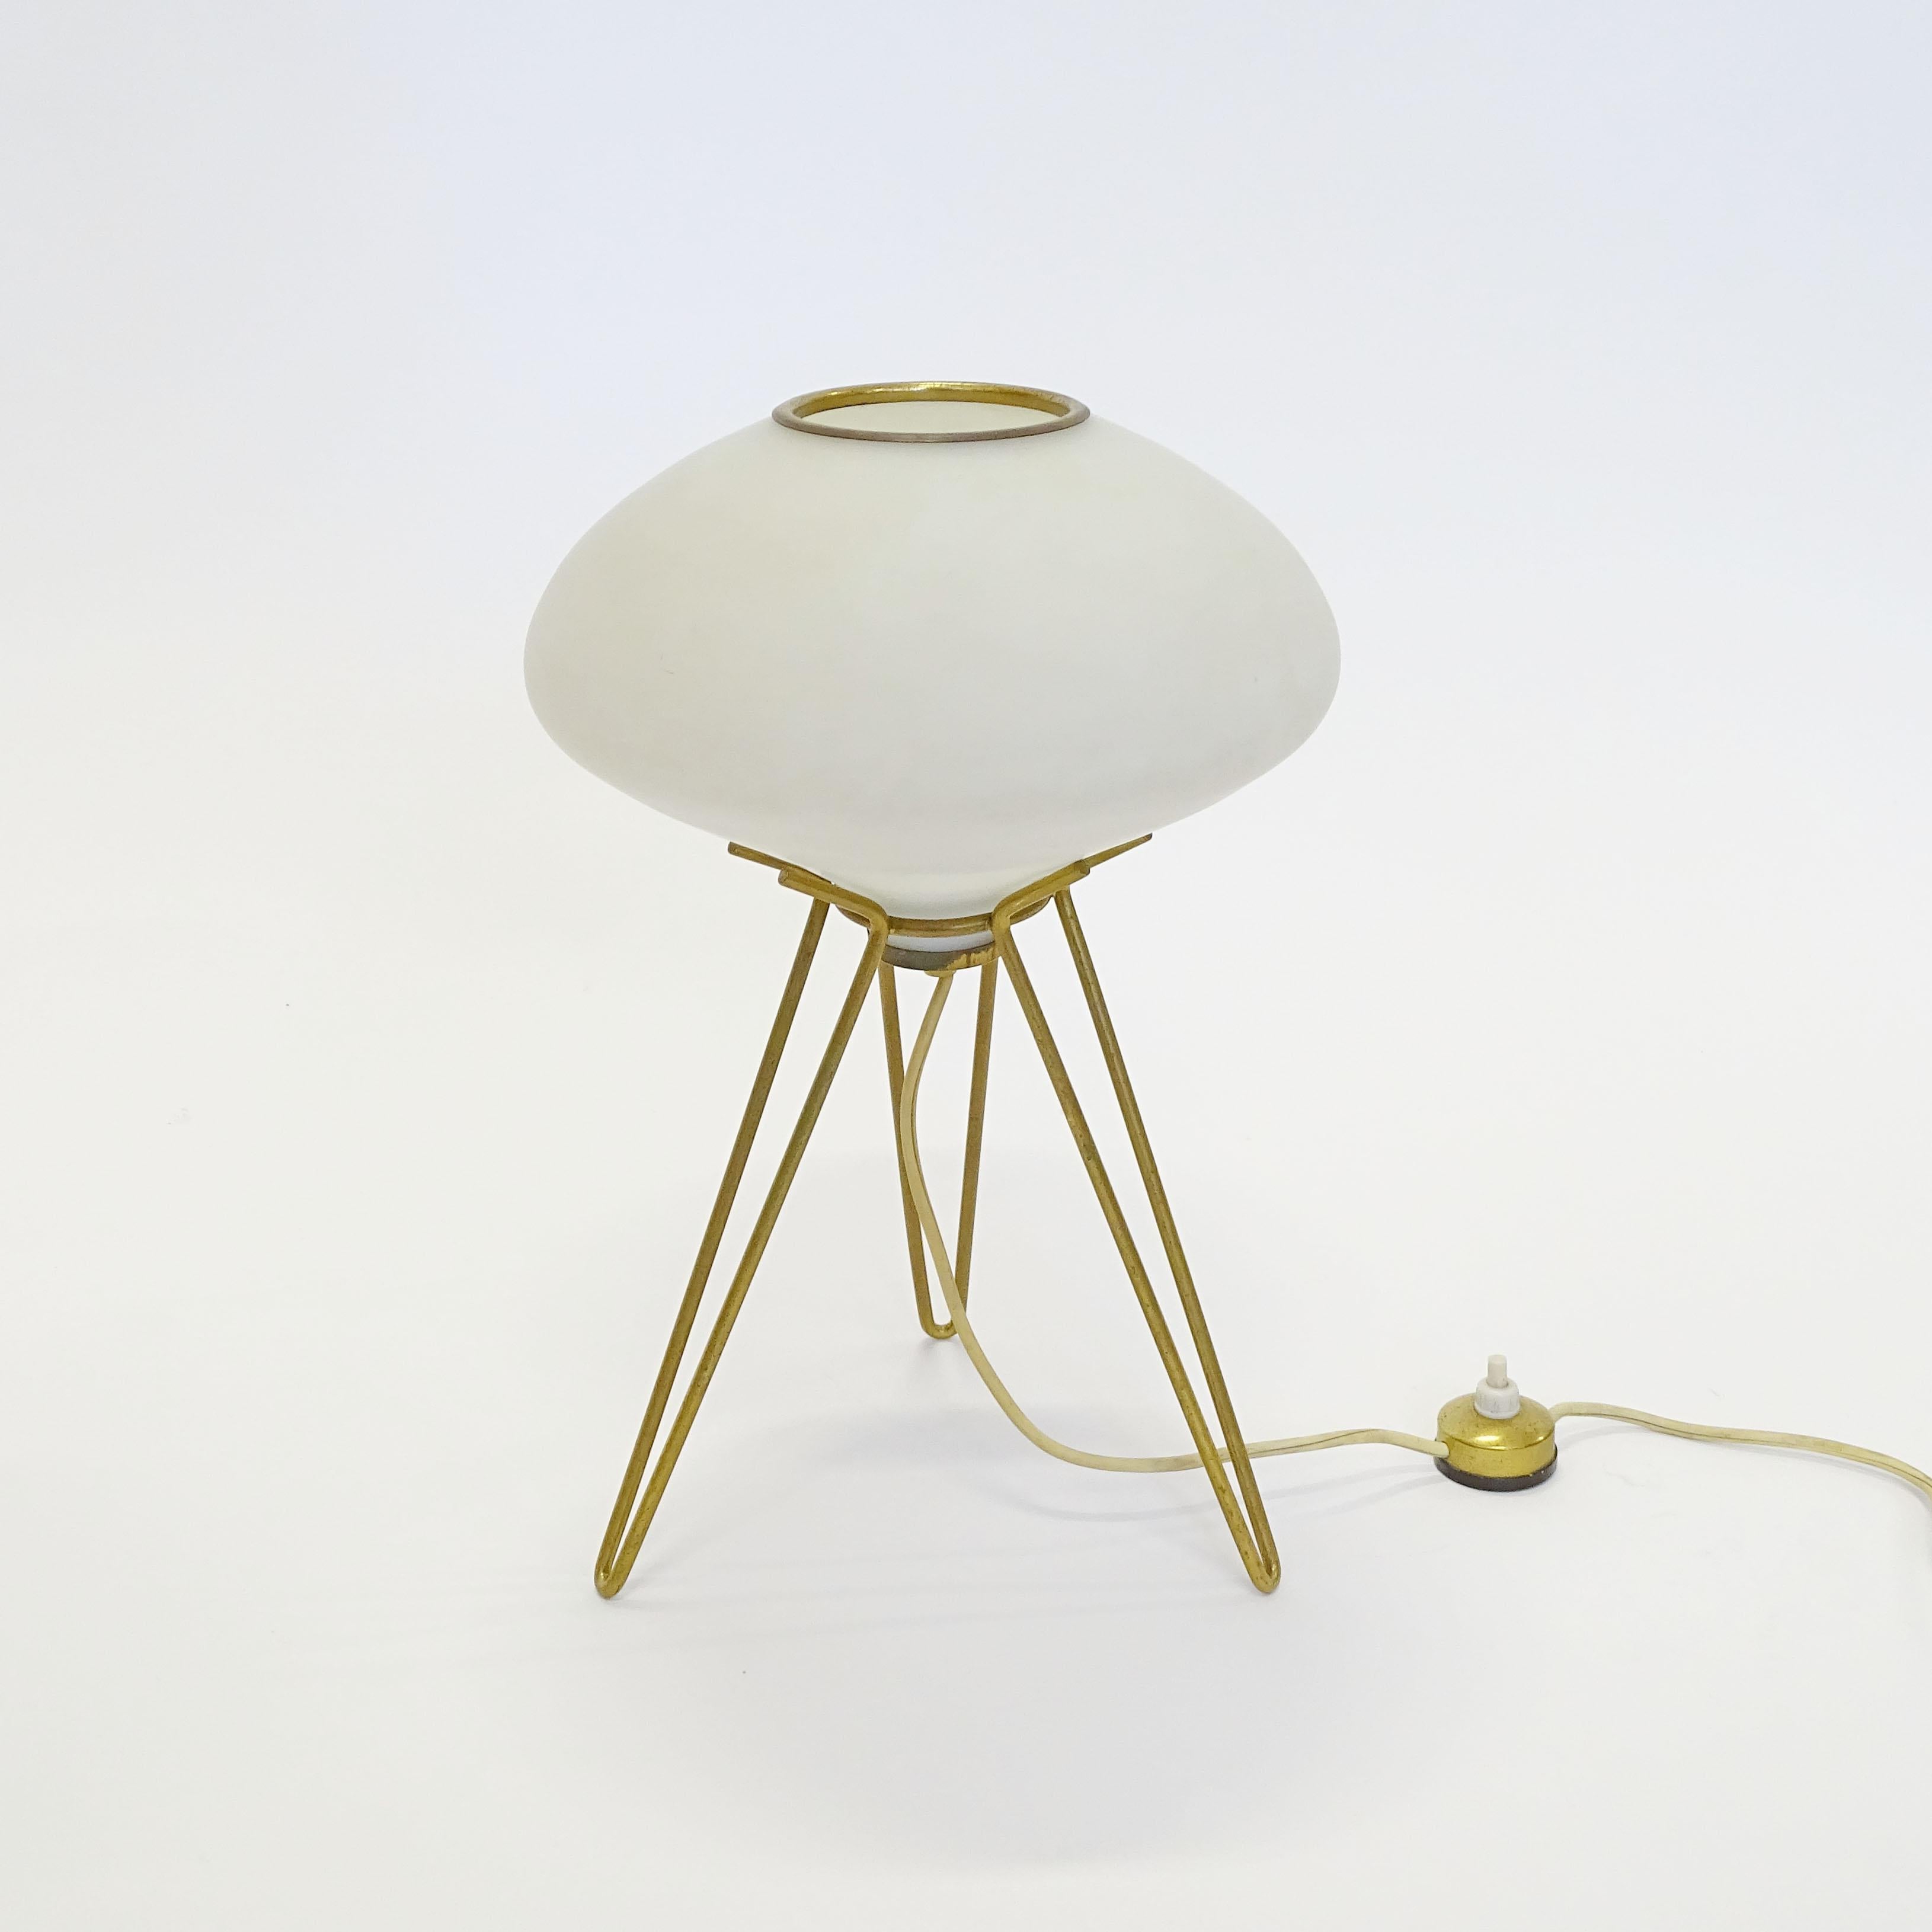 Italian 1950s Brass and Glass Table Lamp For Sale 1